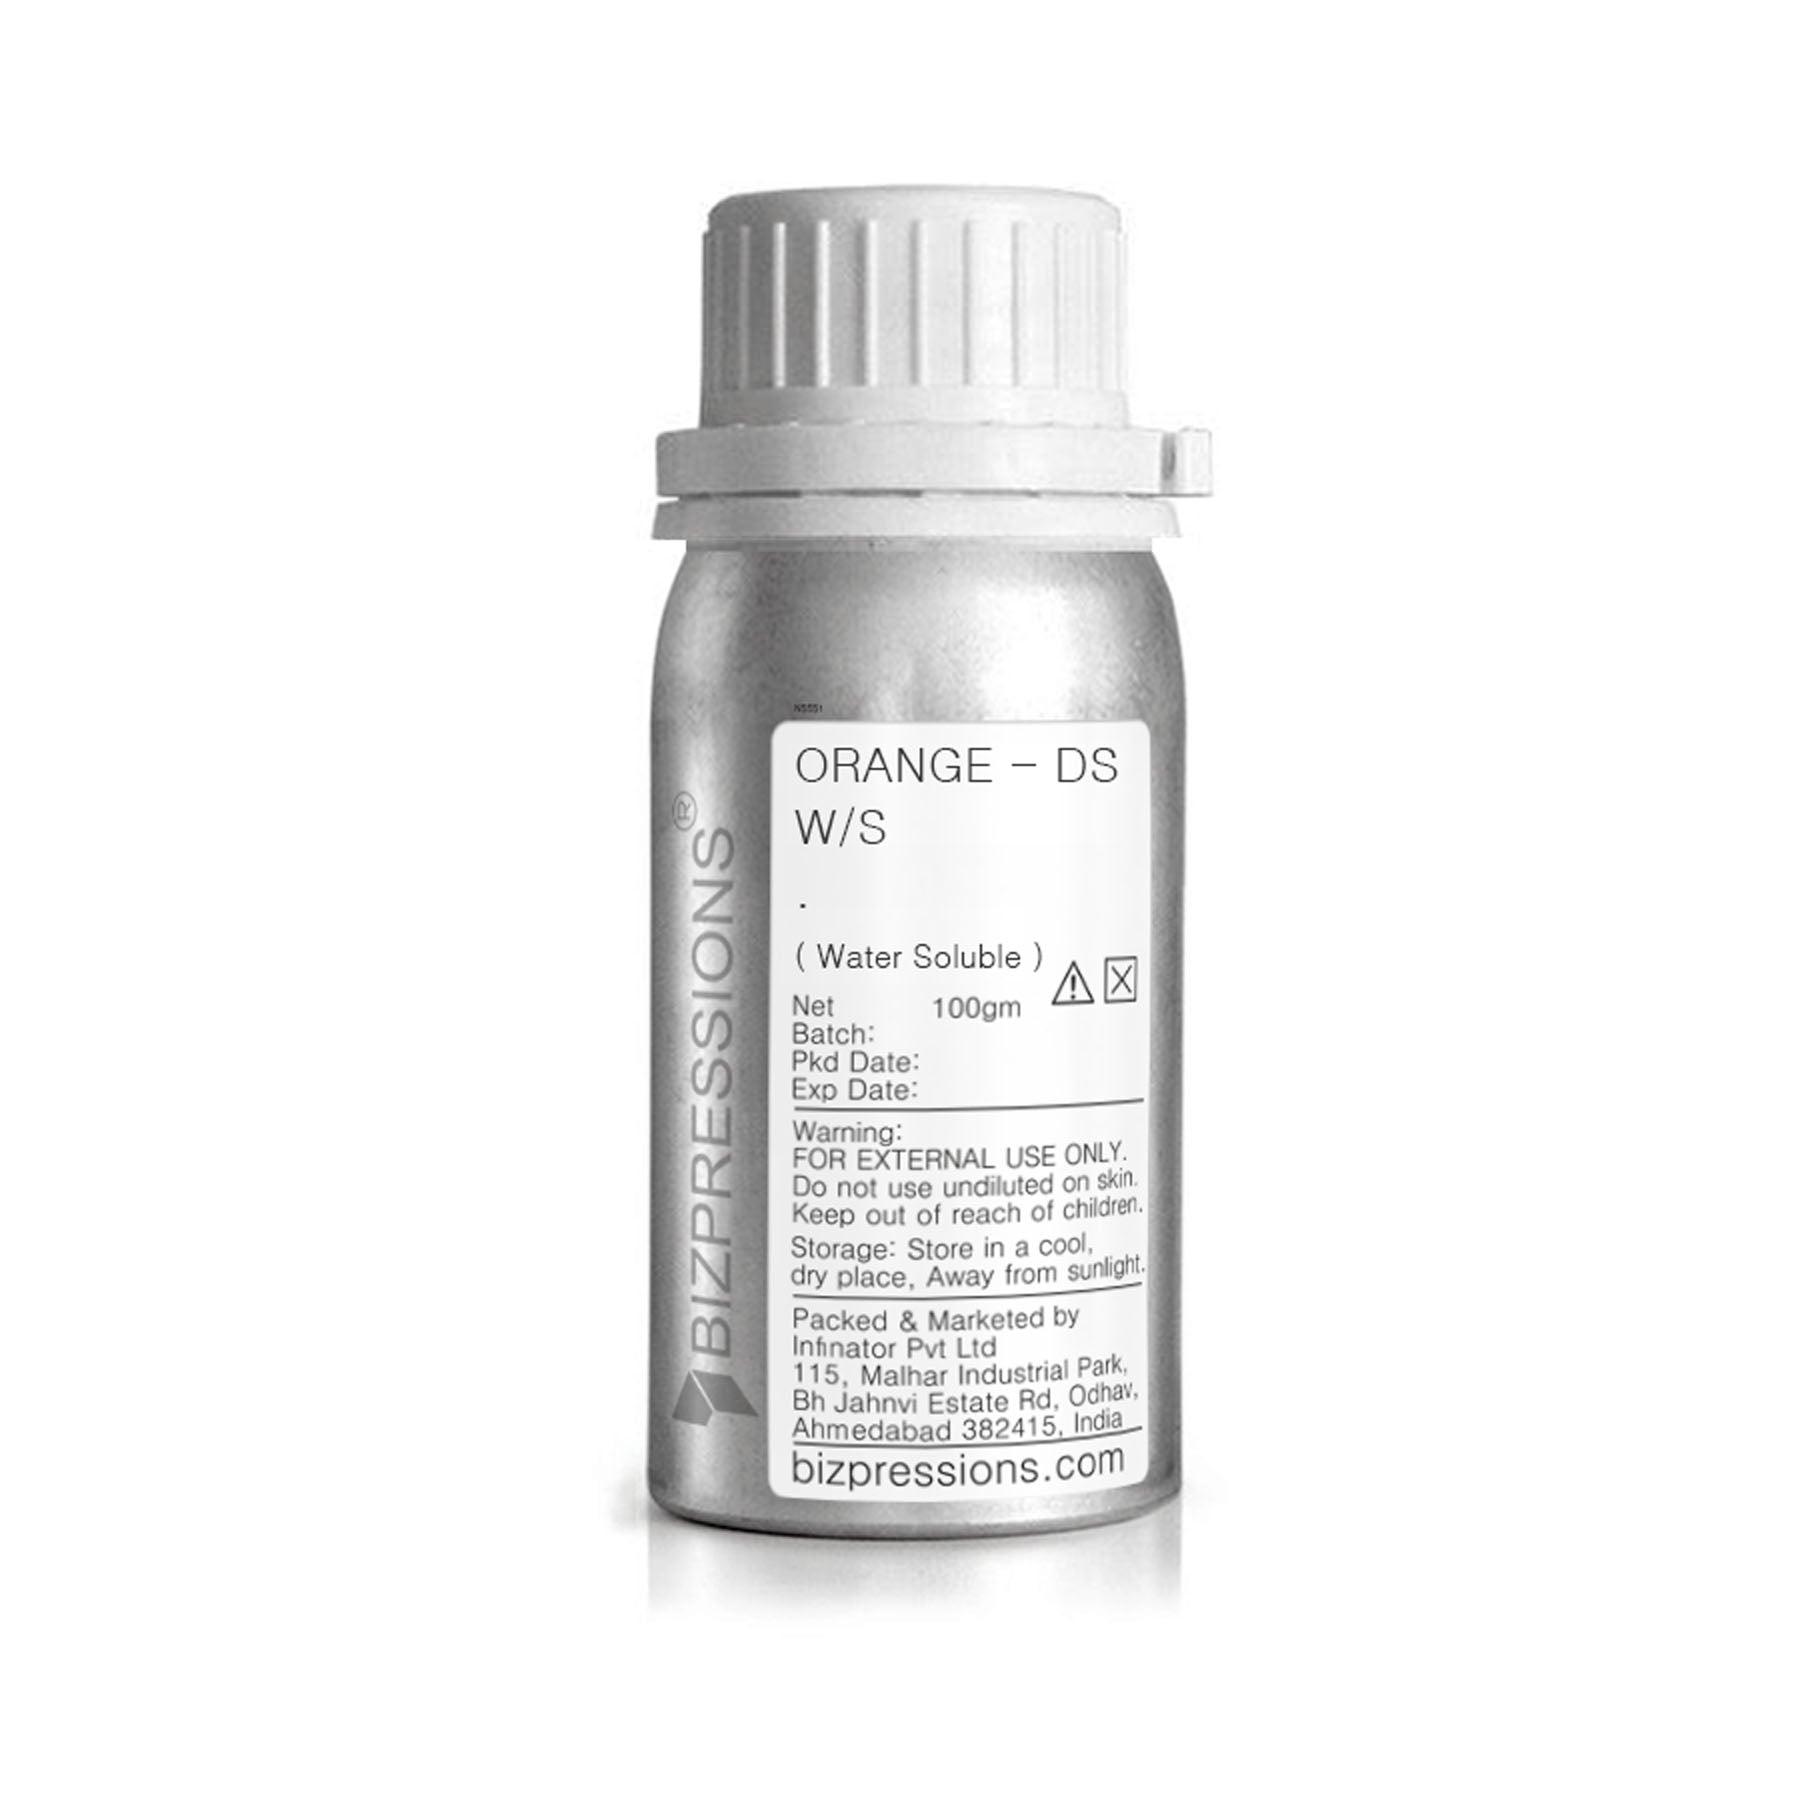 ORANGE - DS W/S - Fragrance ( Water Soluble ) - 100 gm